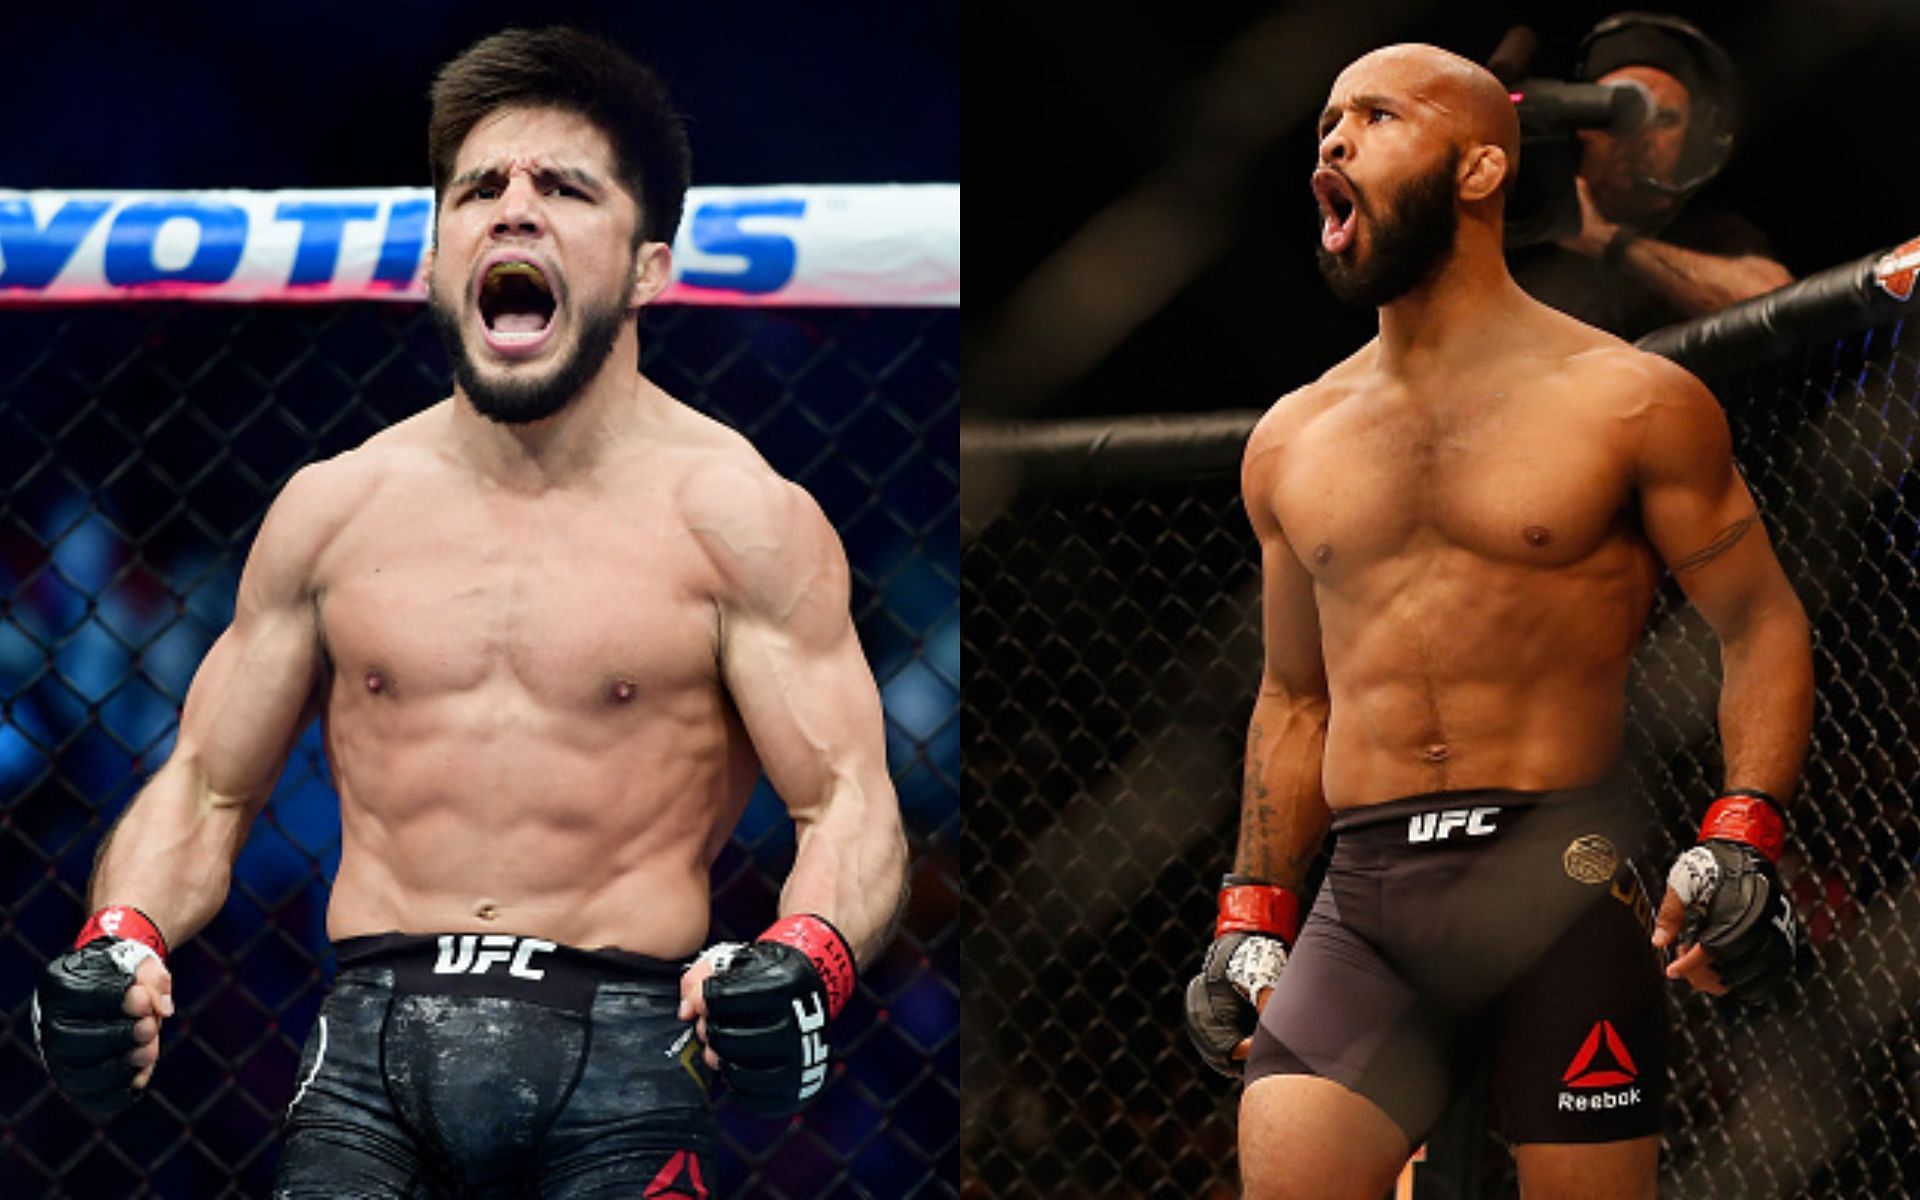 Henry Cejudo (left) and Demetrious Johnson (right)(Images via Getty)